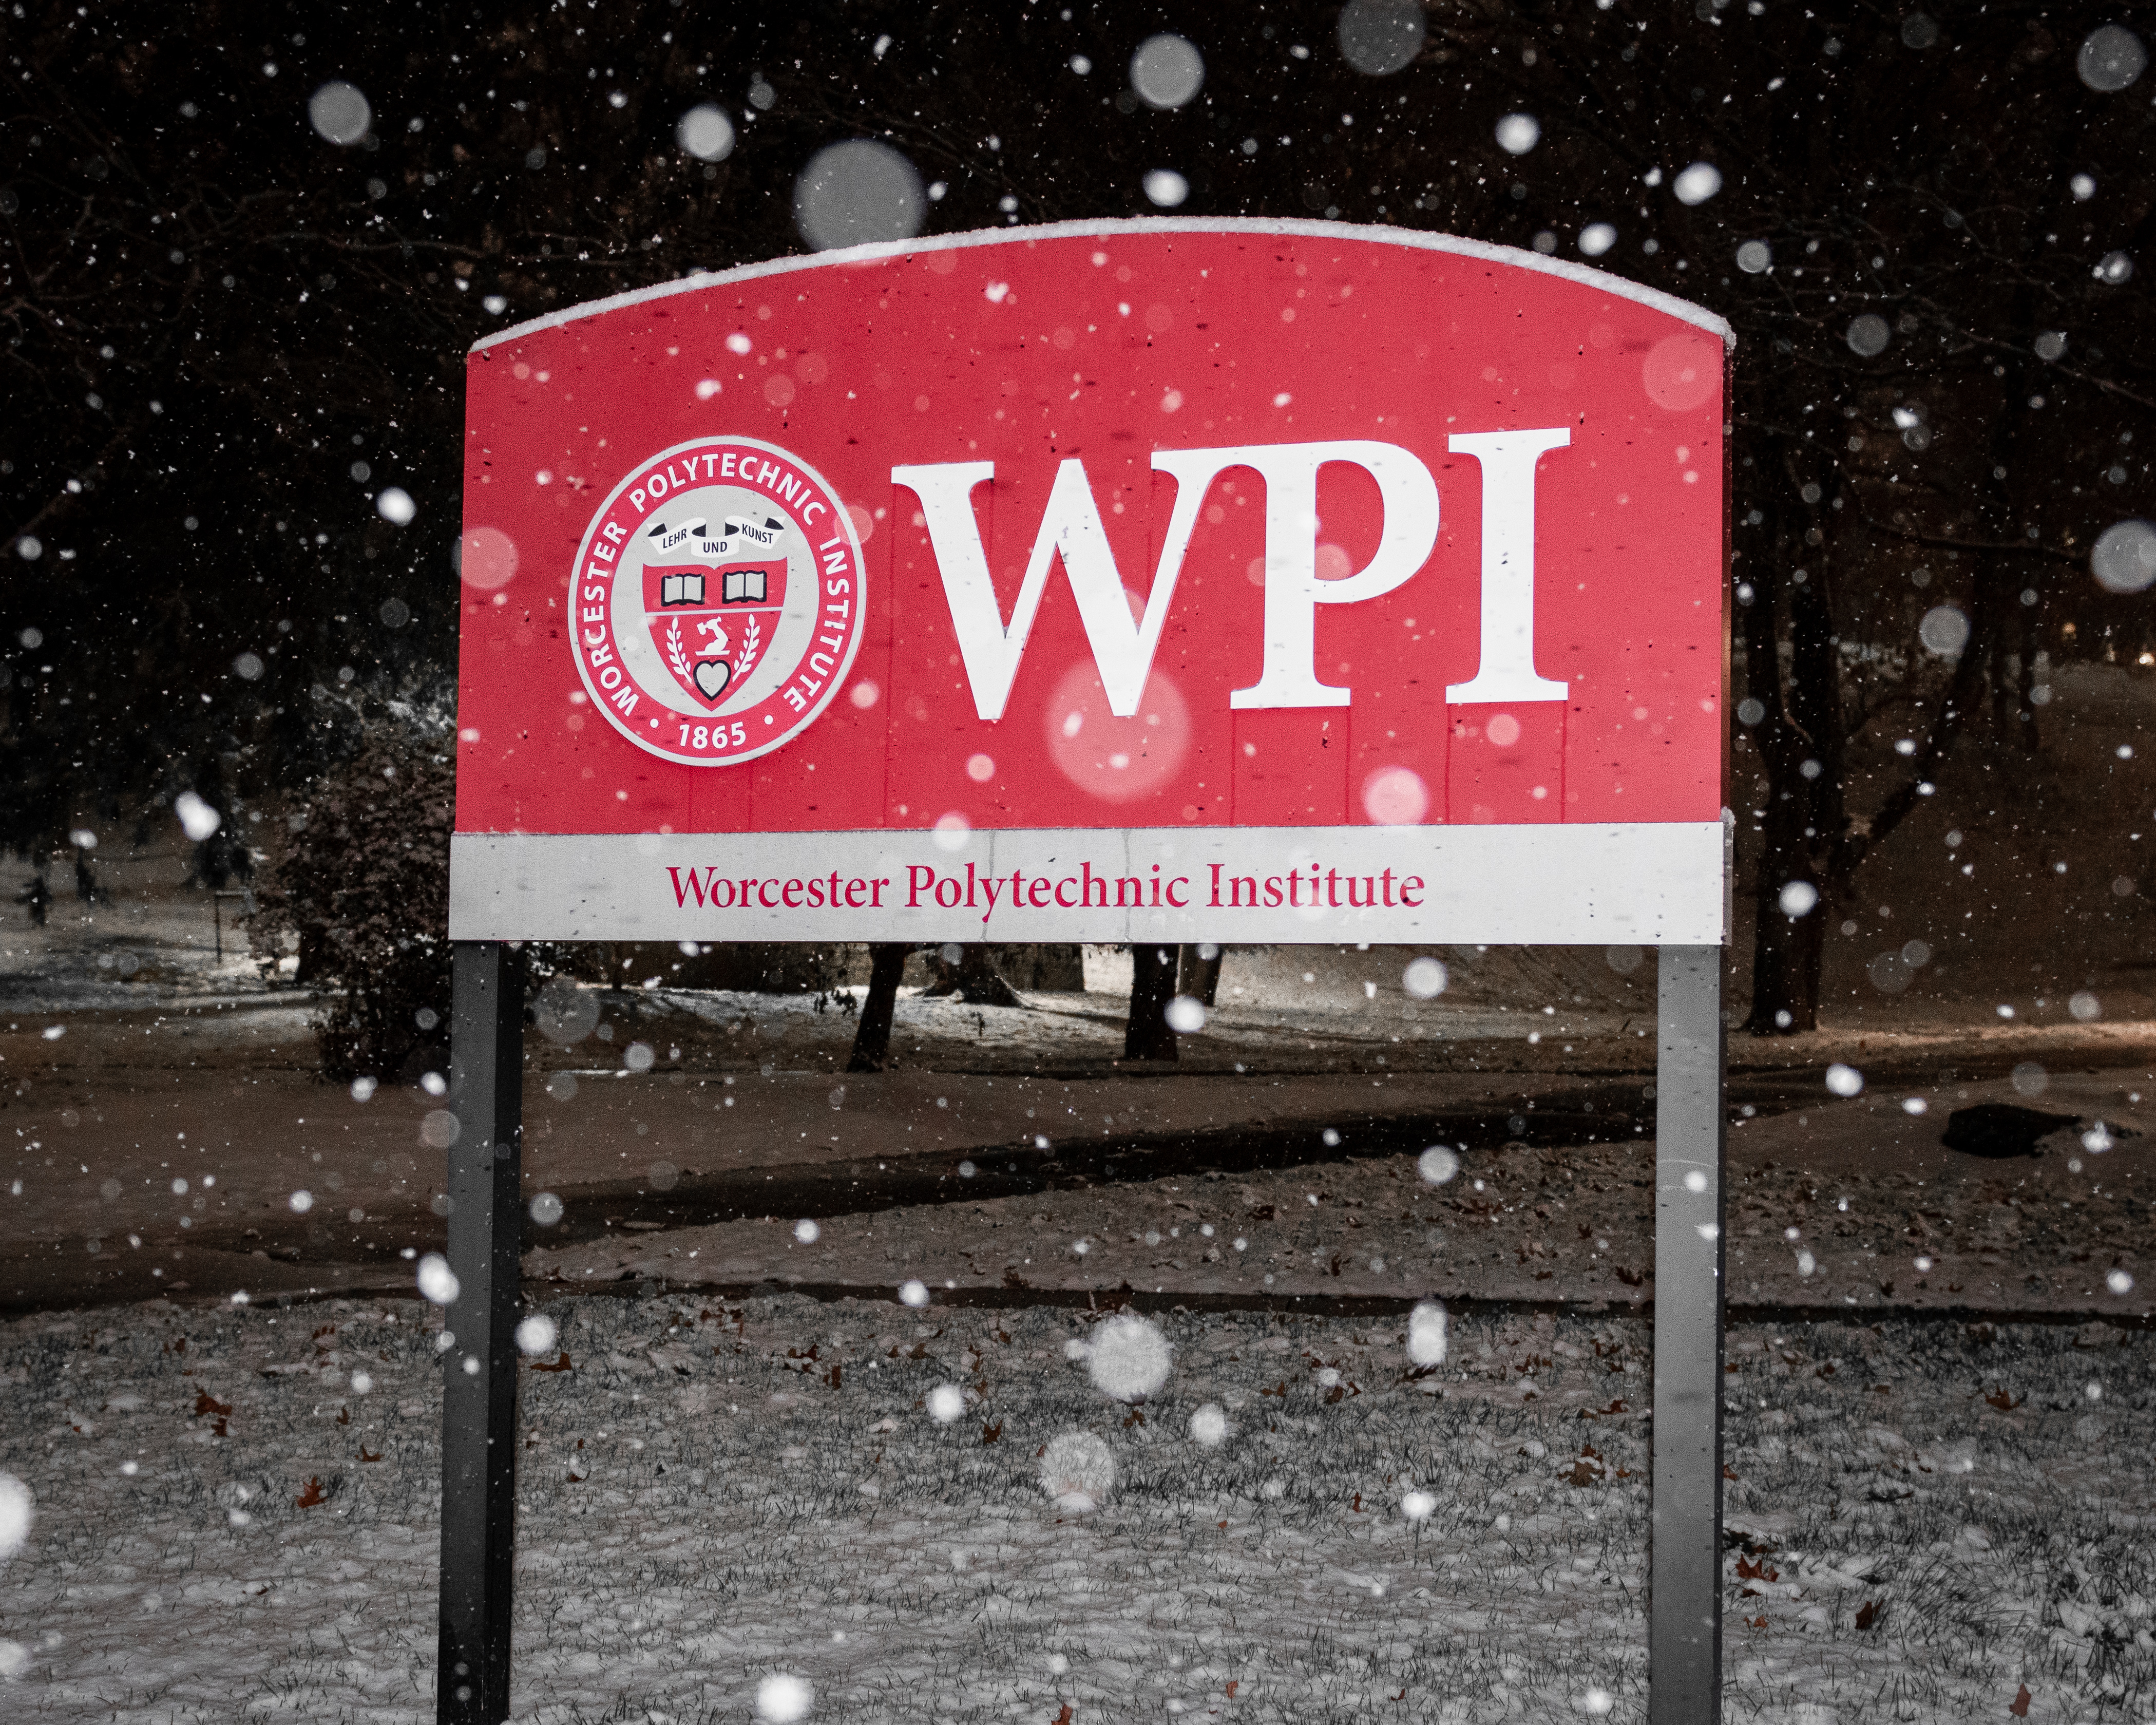 WPI sign in the snow